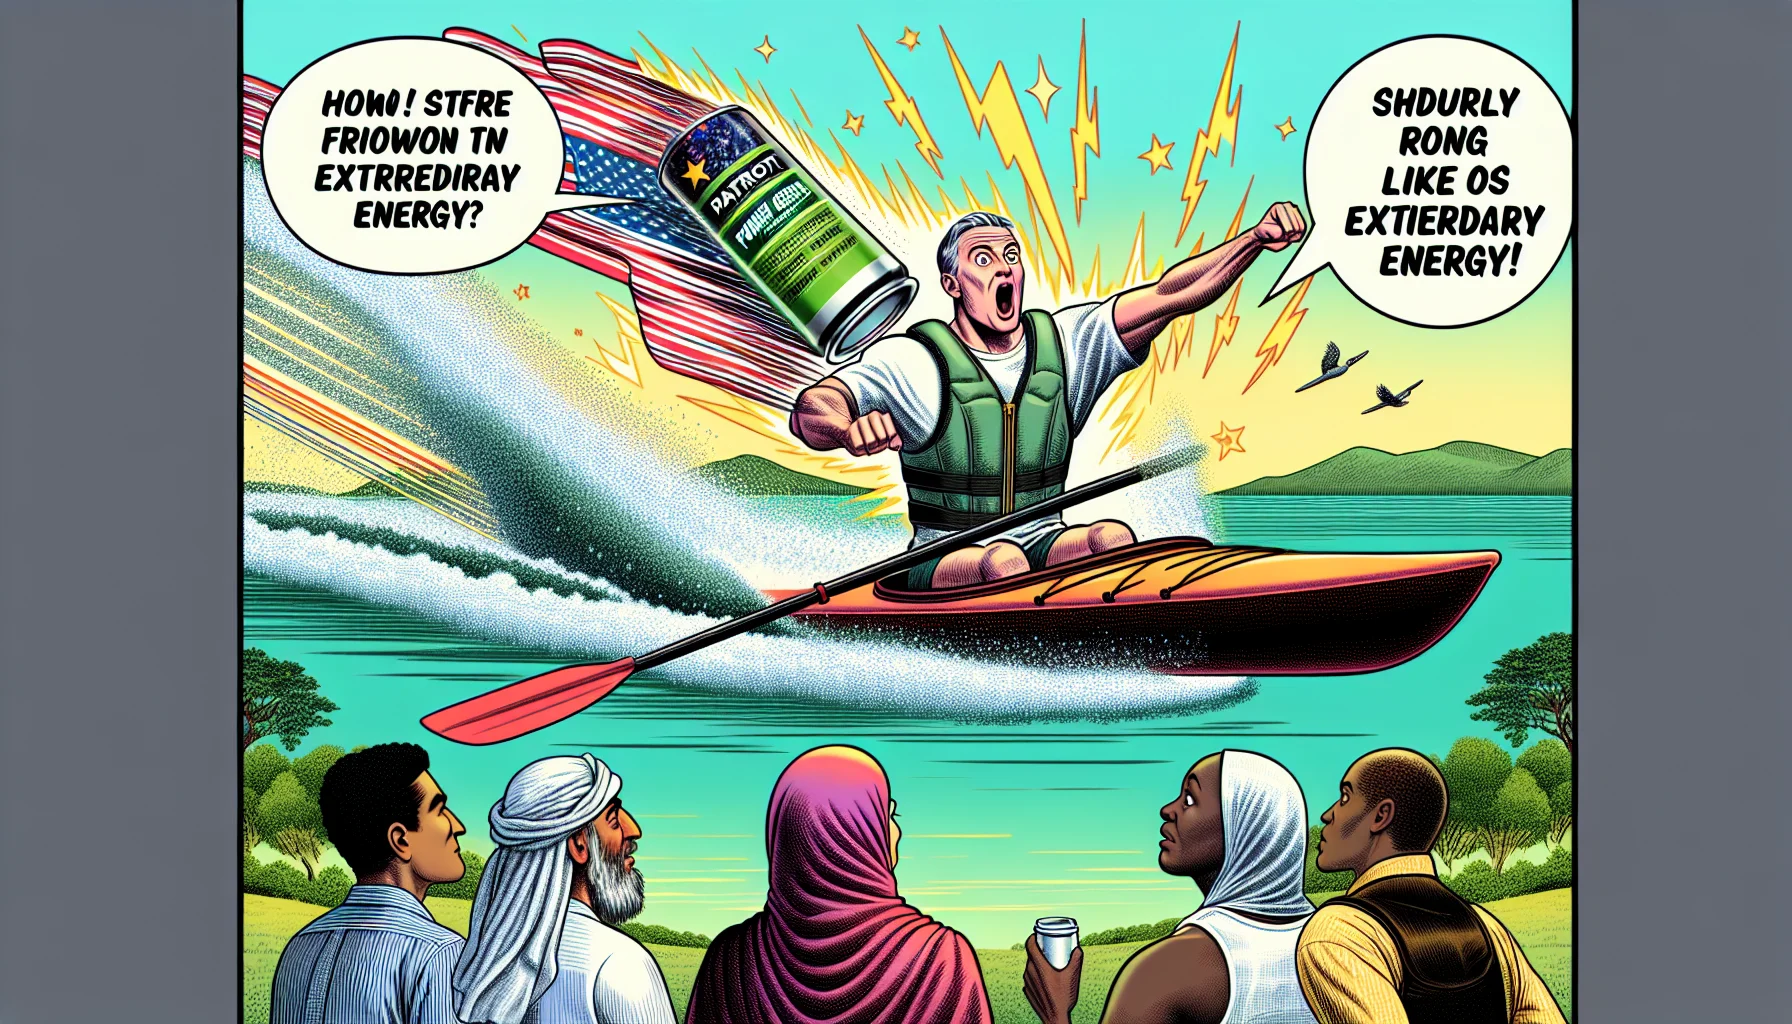 Generate a humorous illustration showcasing a review of a generic health drink called 'Patriot Power Greens'. This energetic image should tantalizingly entice people to exercise. The scene could include a person who, after drinking the beverage, suddenly finds themself imbued with extraordinary energy. This Caucasian male in his early 50s, following a kayak training regimen, starts rowing so fast that he takes off like a rocket. Let's also include a group of onlookers, a Middle-Eastern female, a Hispanic male, and a Black female, all looking utterly stunned and inspired by the scene.